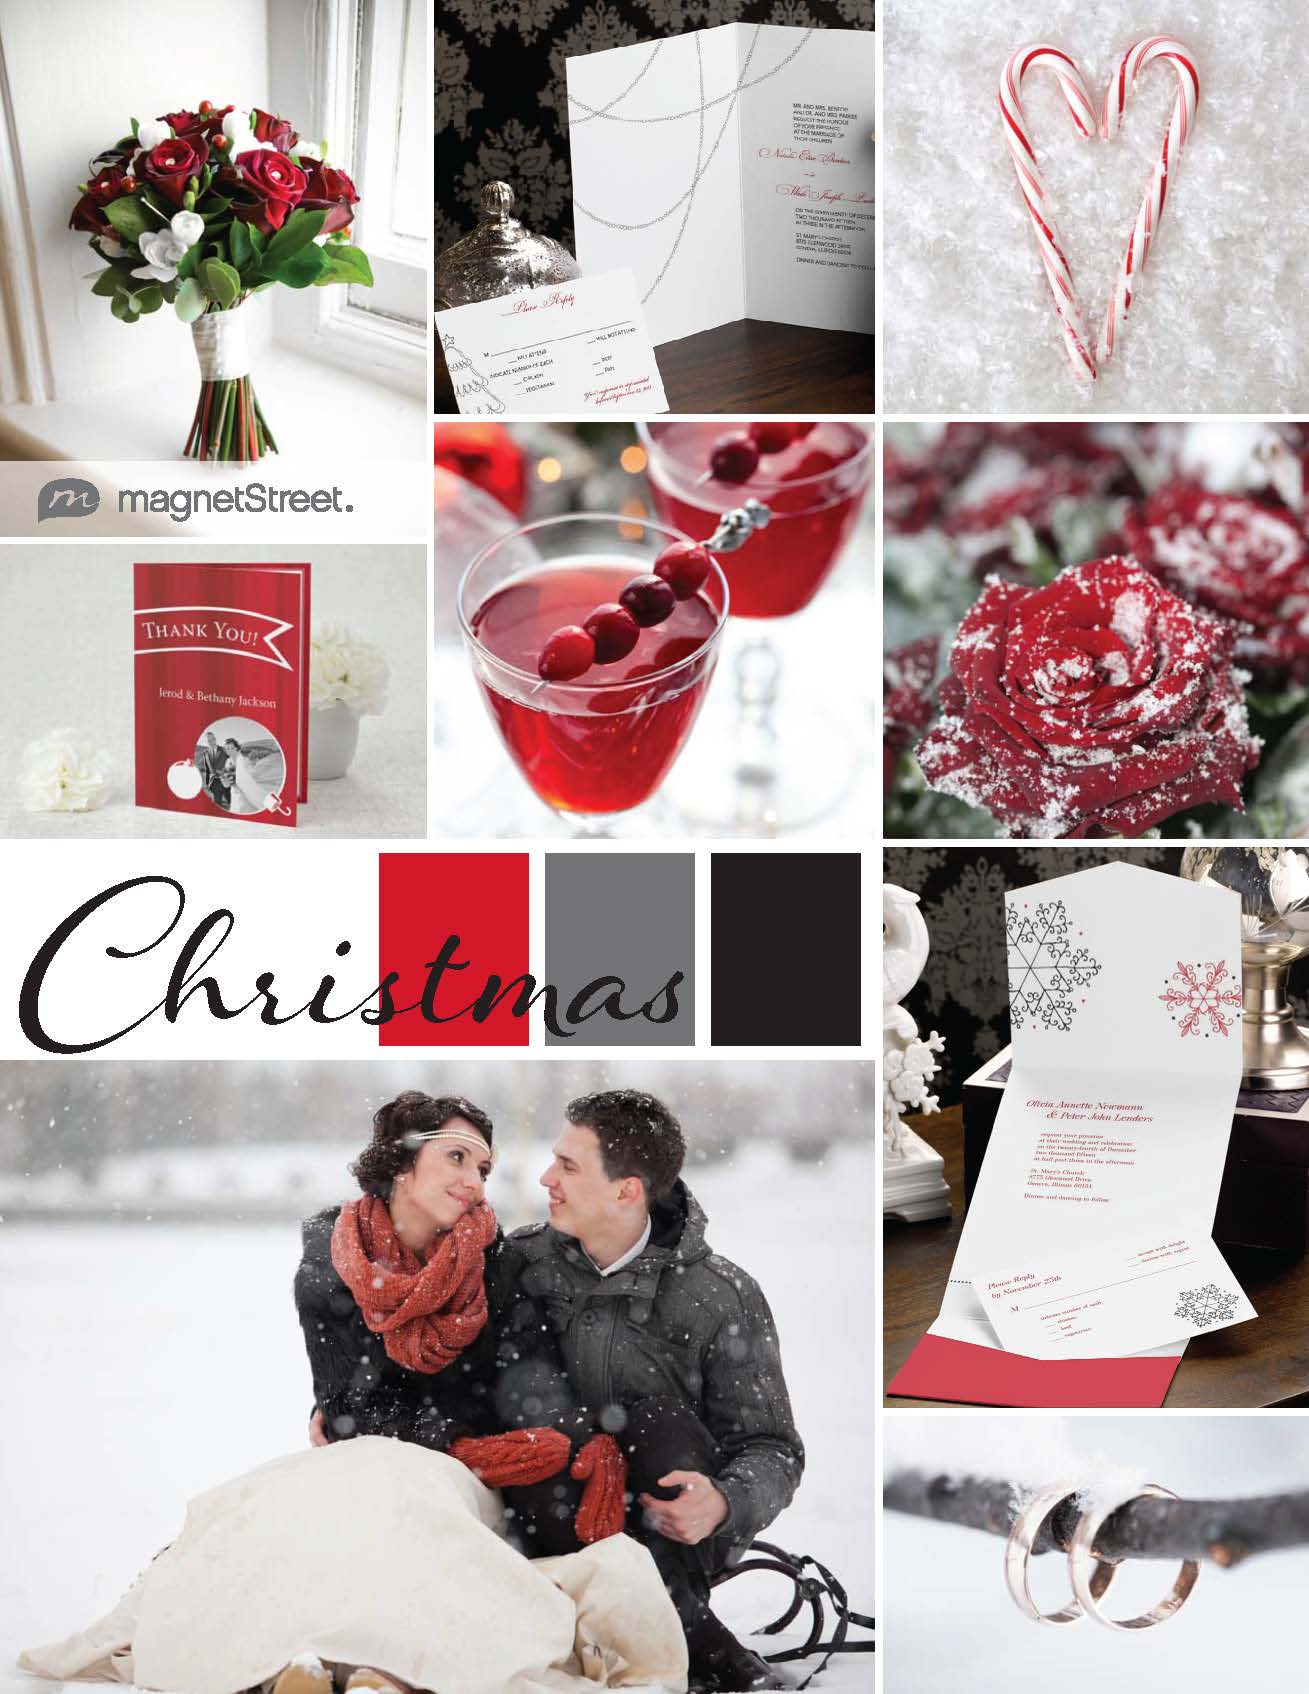 Holiday wedding inspiration in red, charcoal and black!